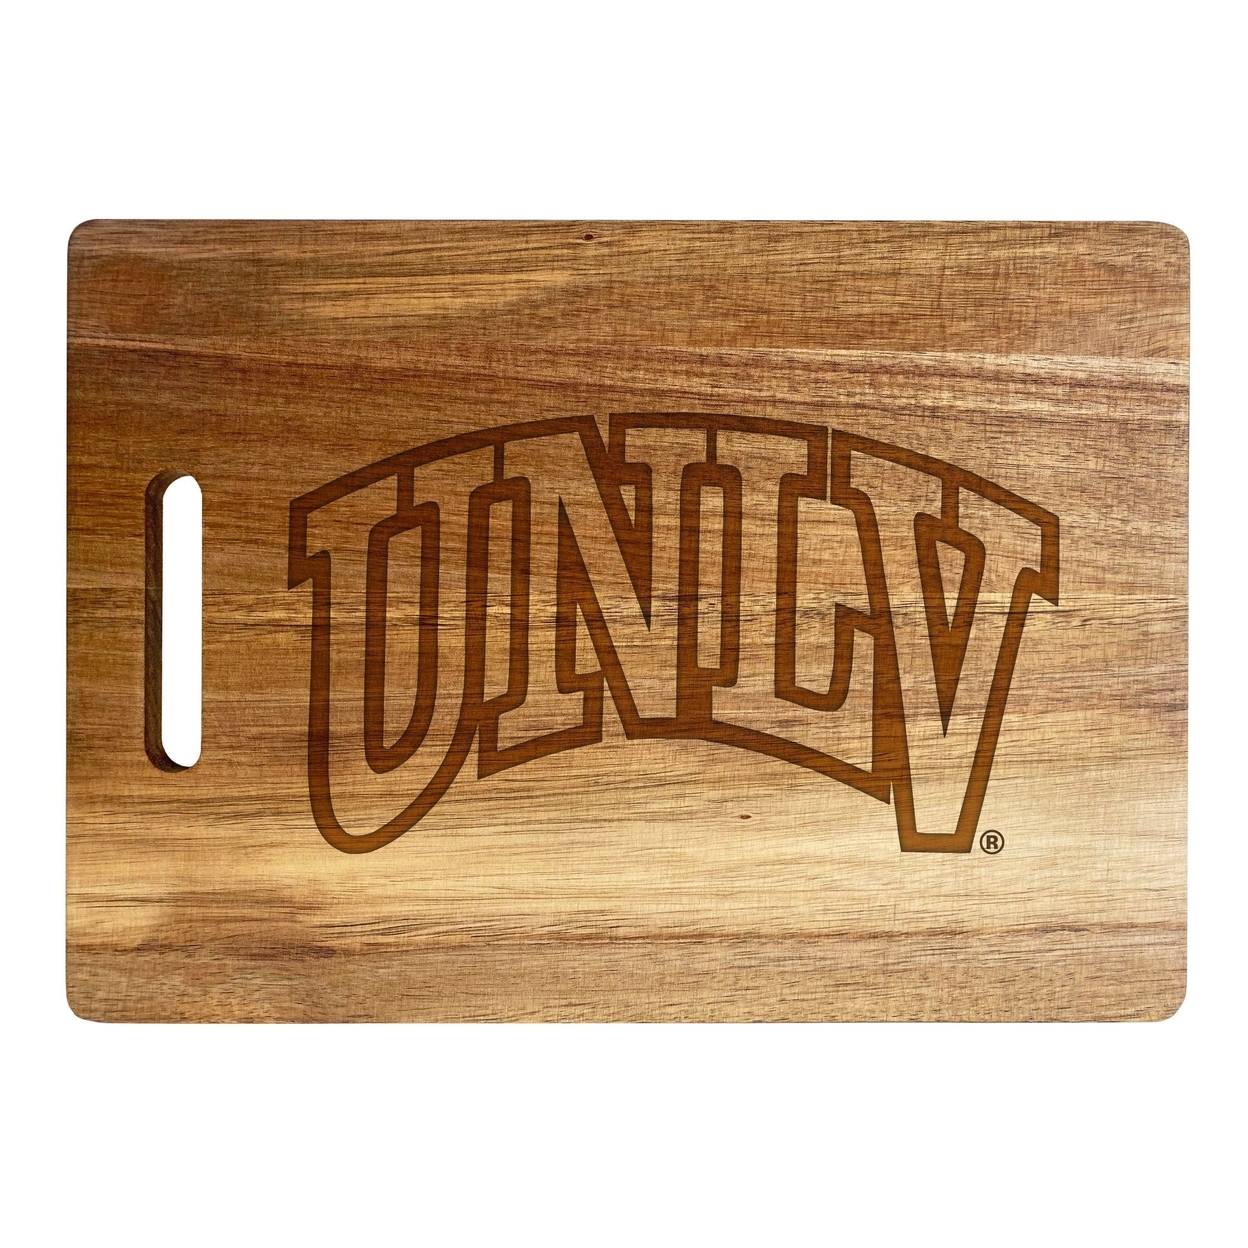 UNLV Rebels Engraved Wooden Cutting Board 10 X 14 Acacia Wood - Large Engraving